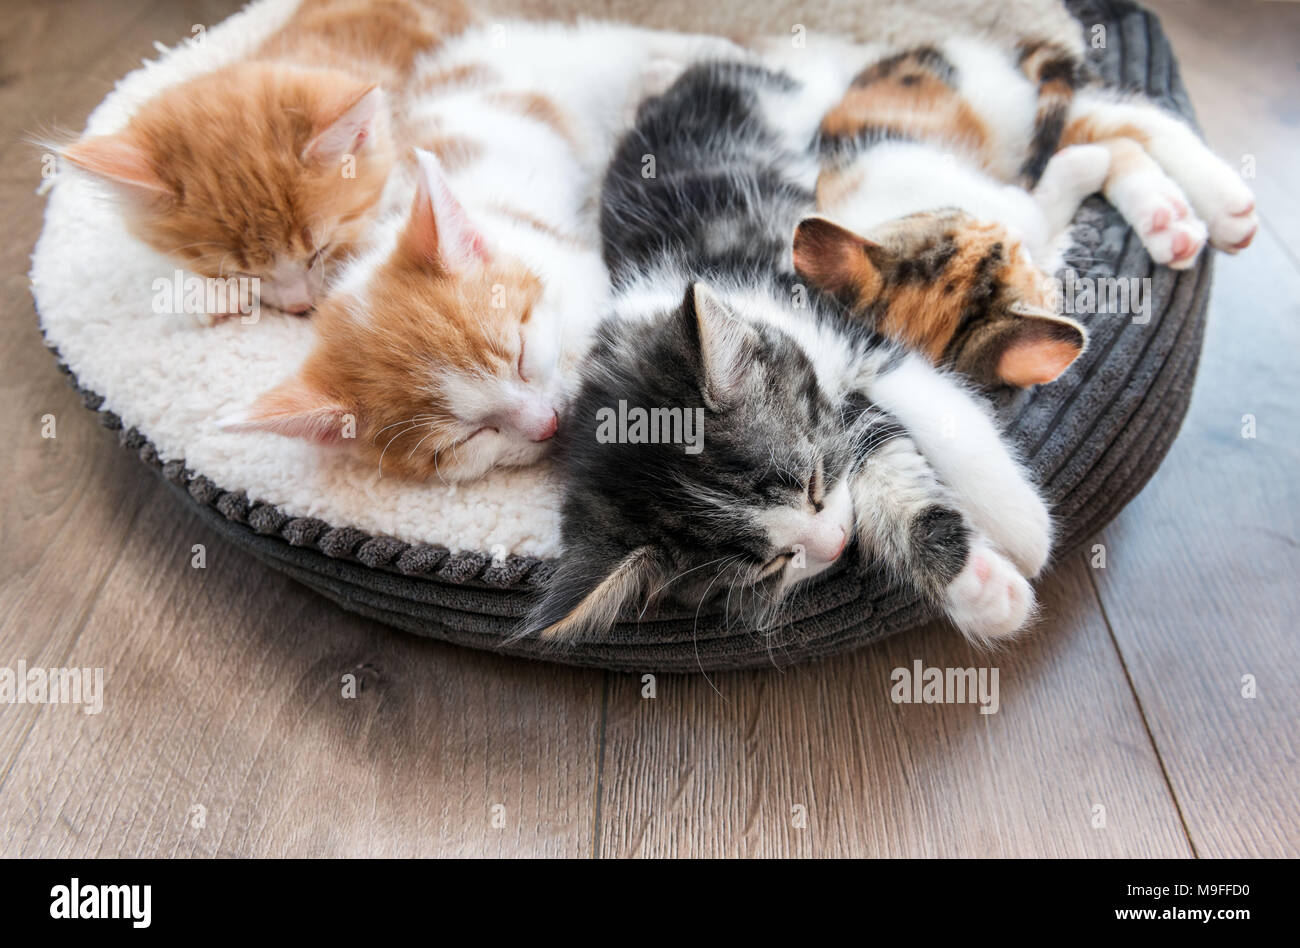 Looking down at four fluffy kittens sleeping in a white bed Stock Photo